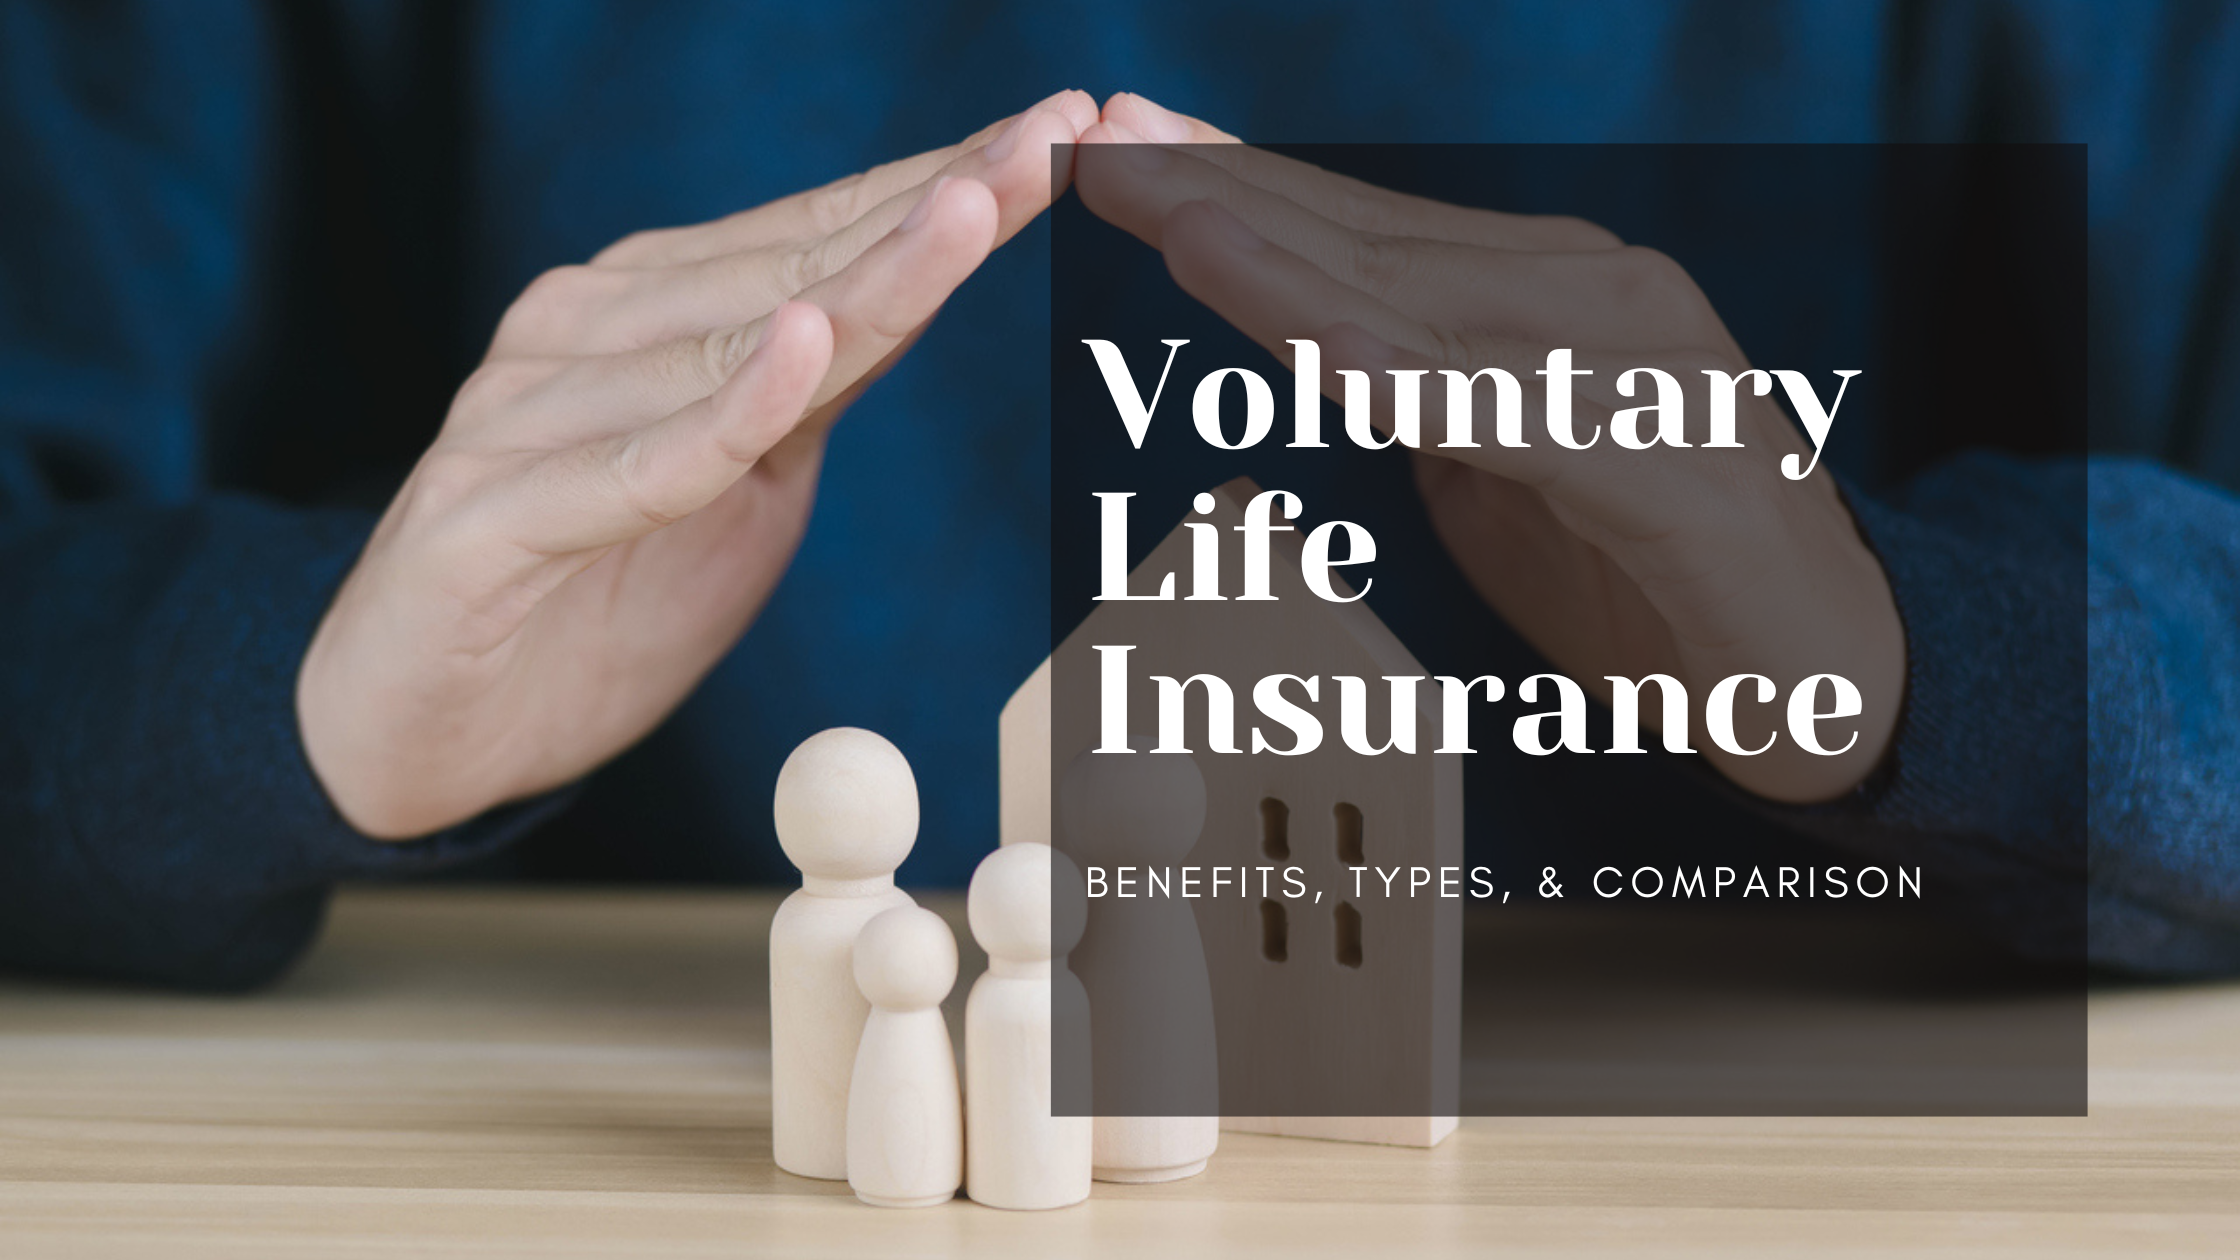 Voluntary Life Insurance: Benefits, Types, and Comparison